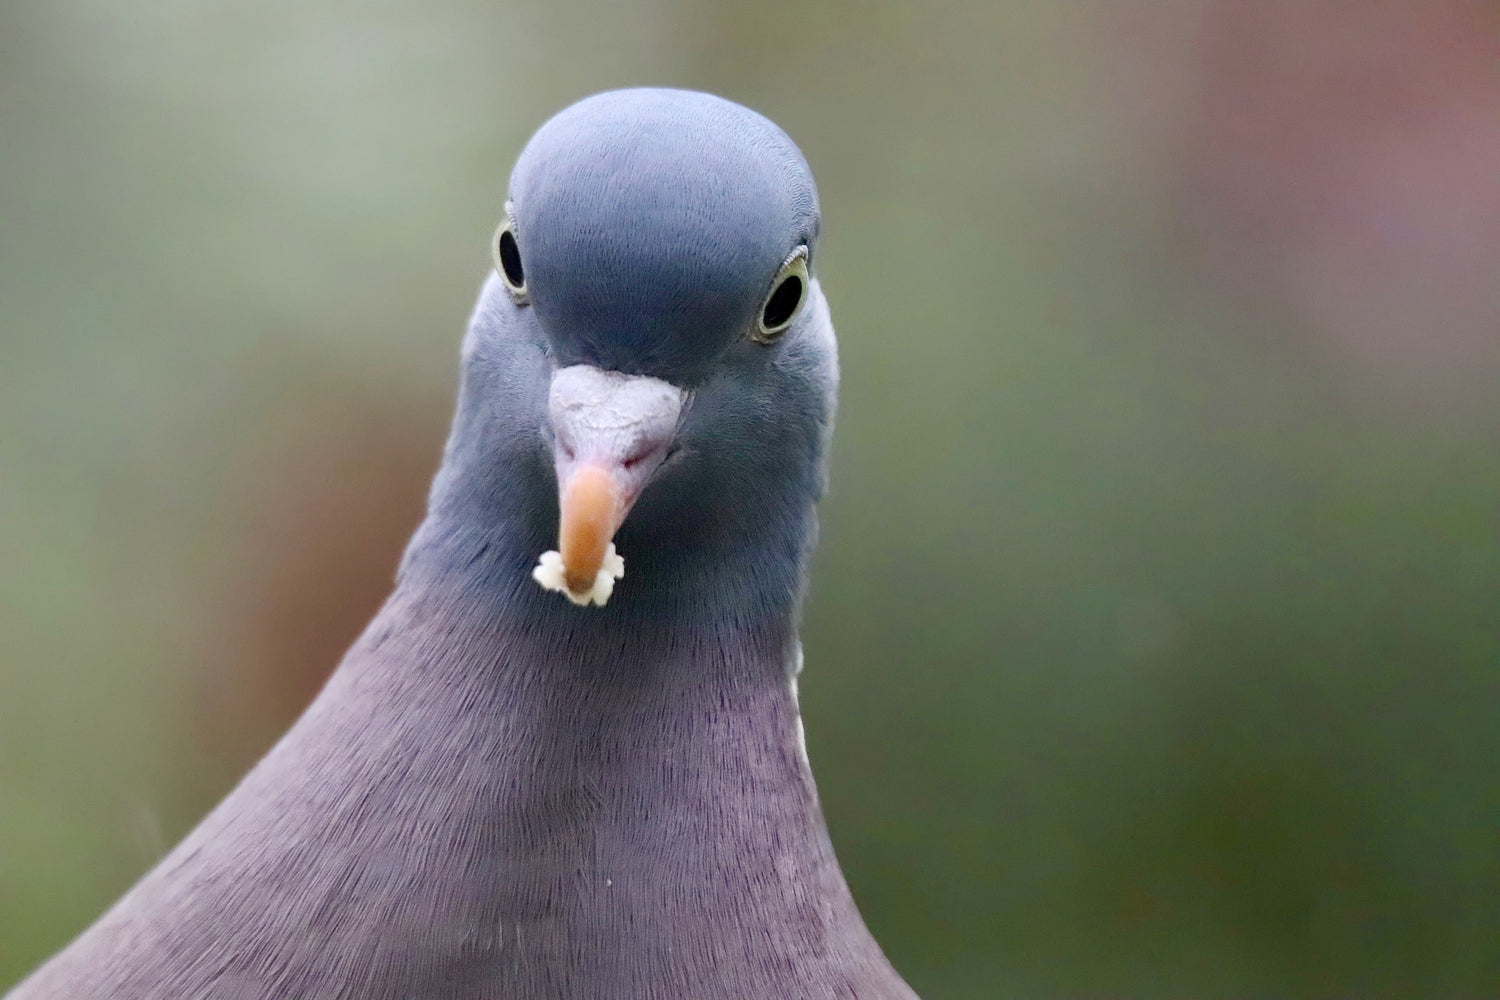 Pigeon looking directly into camera after taking some bird food 